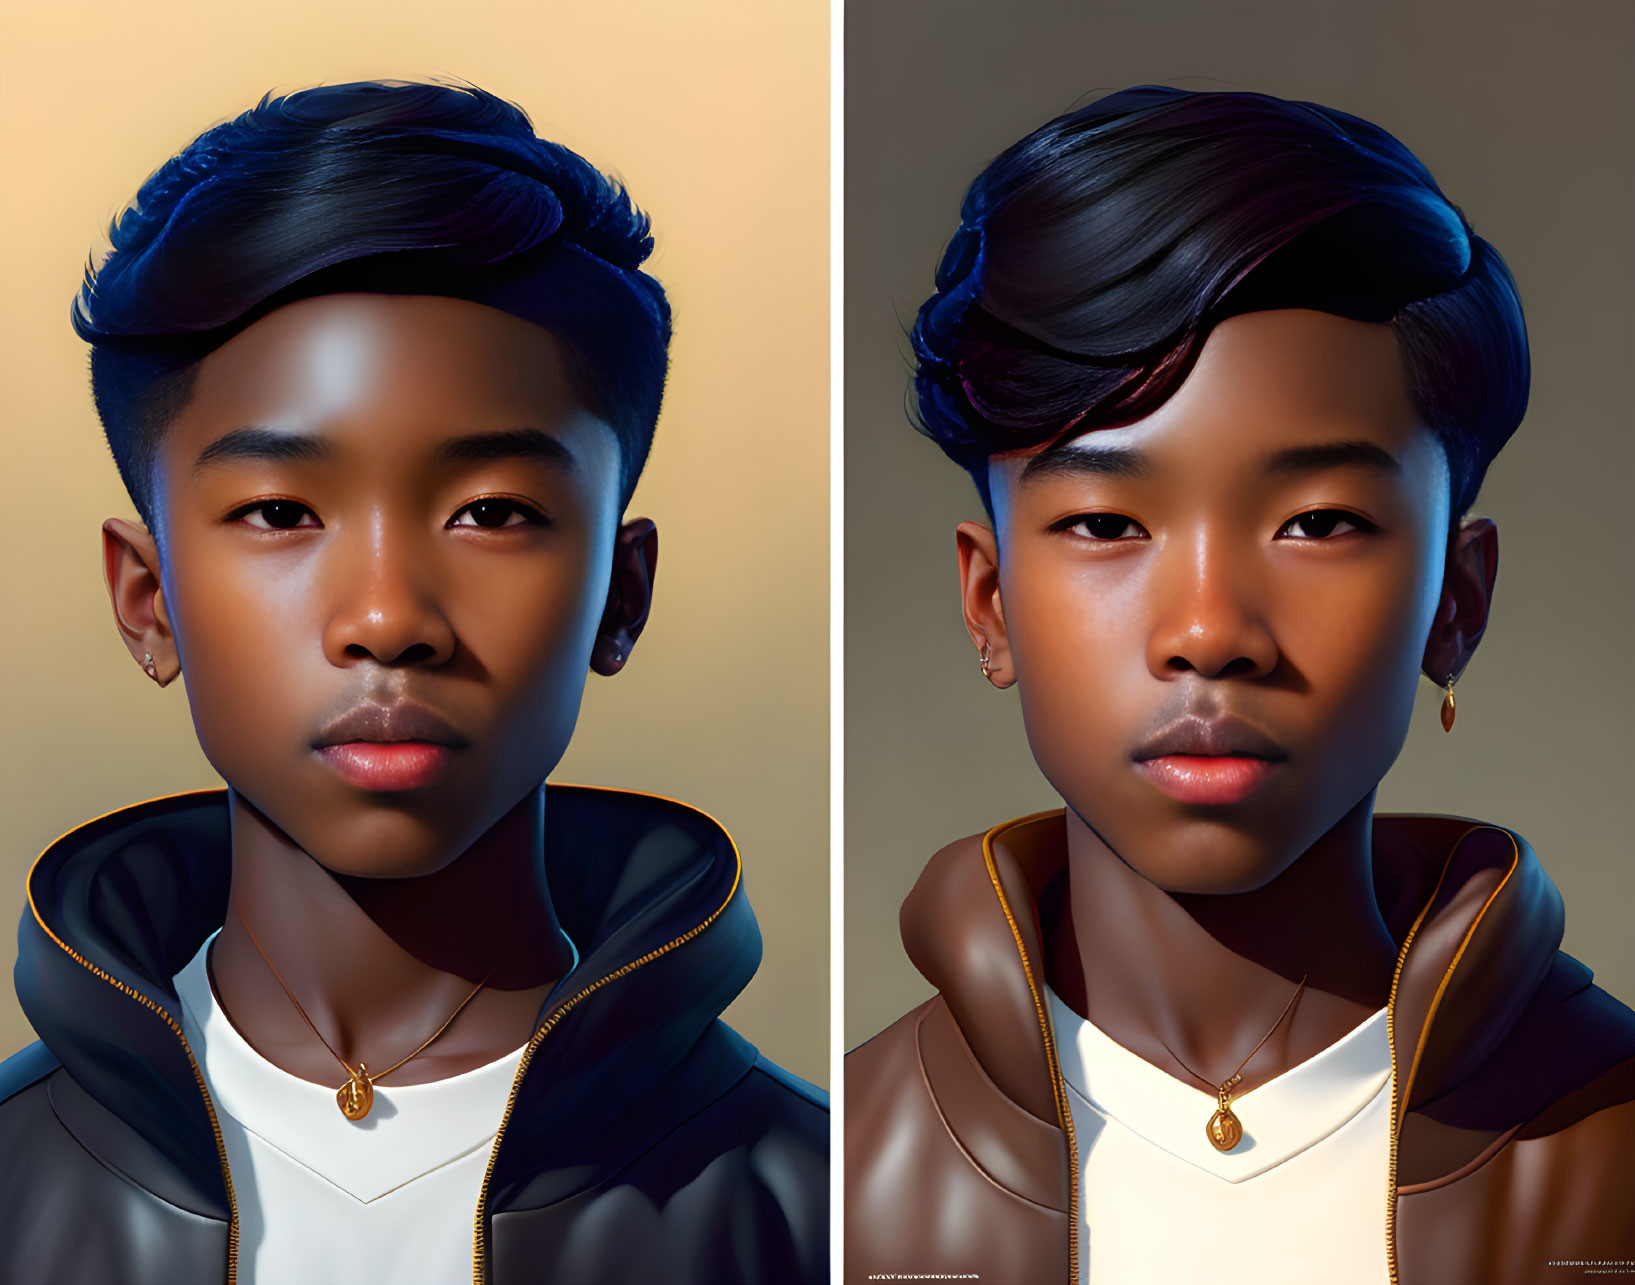 Young person with stylized hair in two color schemes and detailed lighting effects